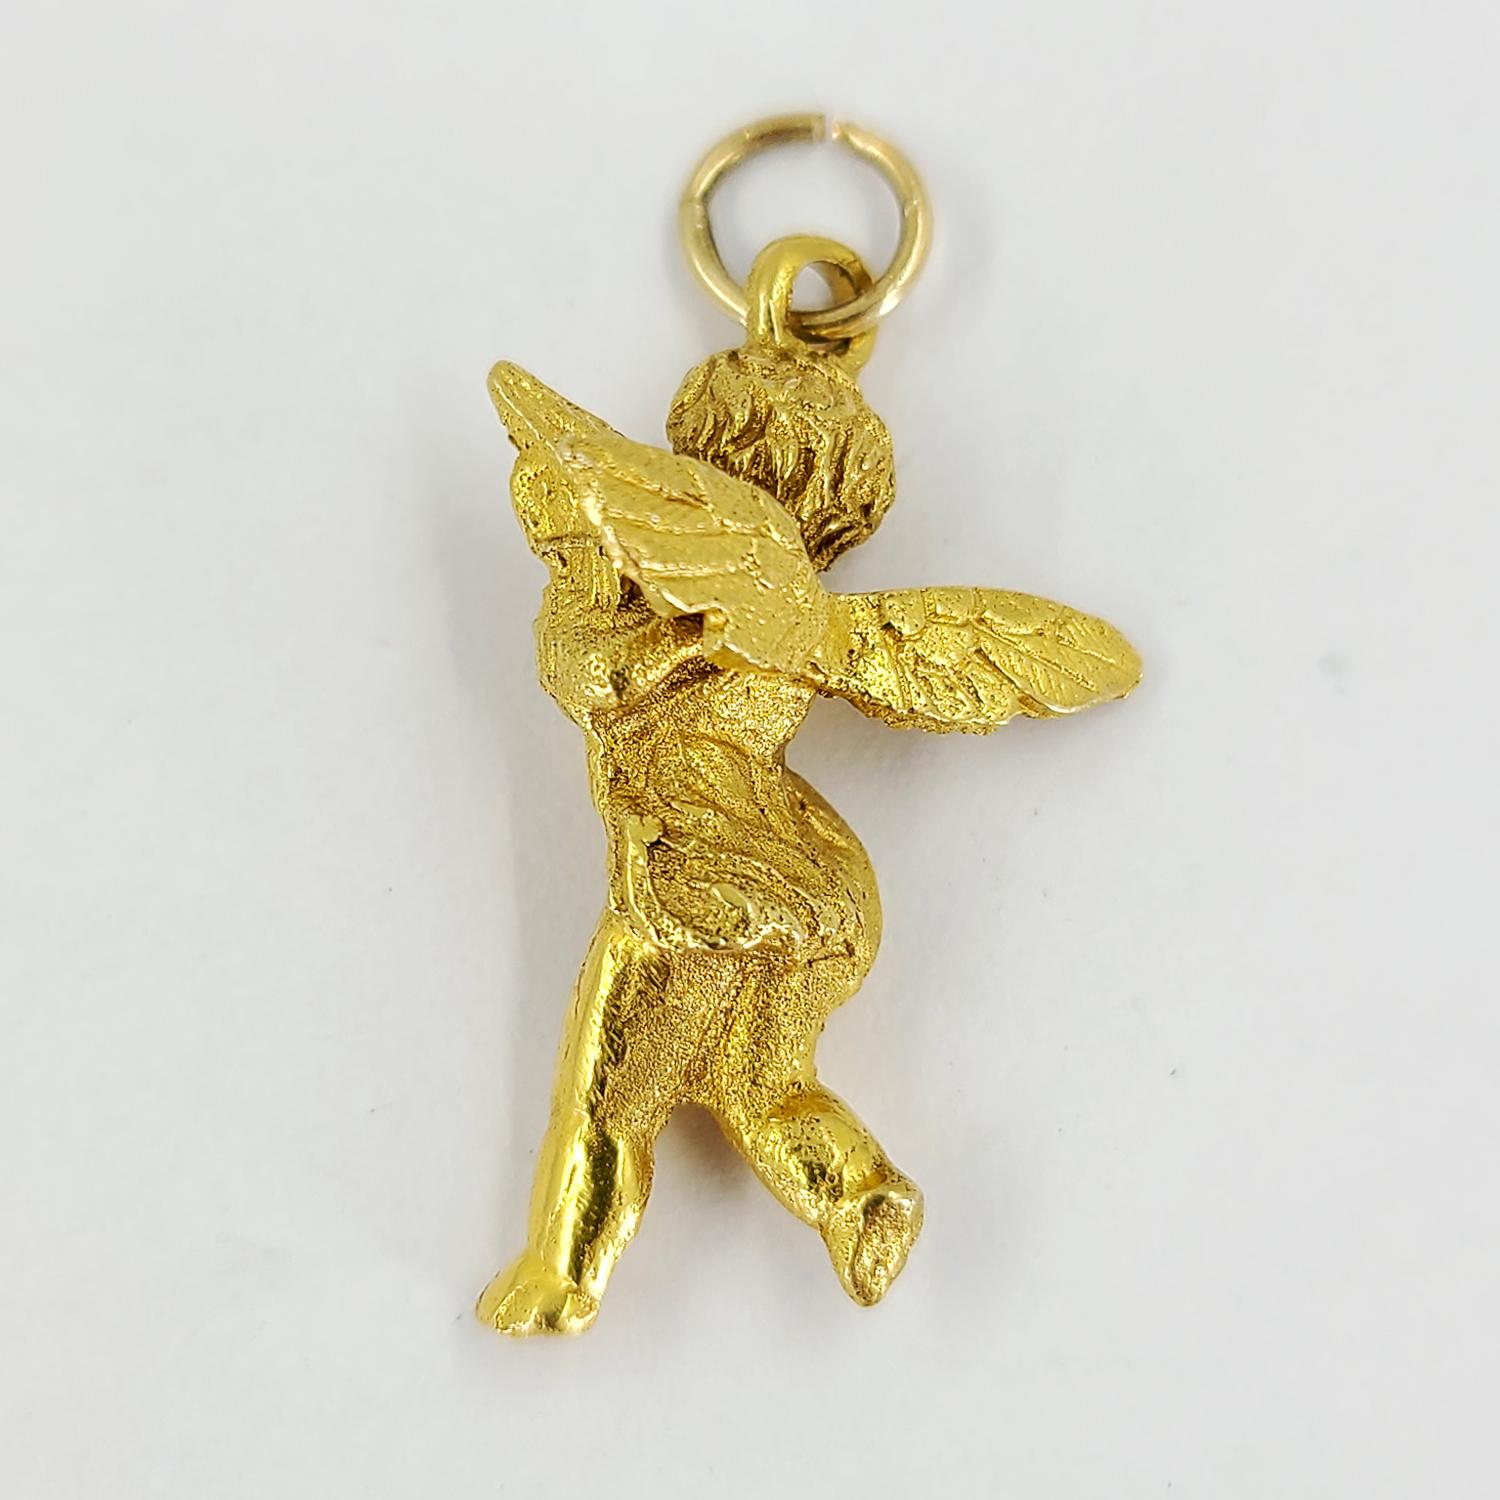 18 Karat Yellow Gold Cherub Charm Pendant Featuring Brushed Texture. Finished Weight Is 4.8 Grams. 1 Inch Length.